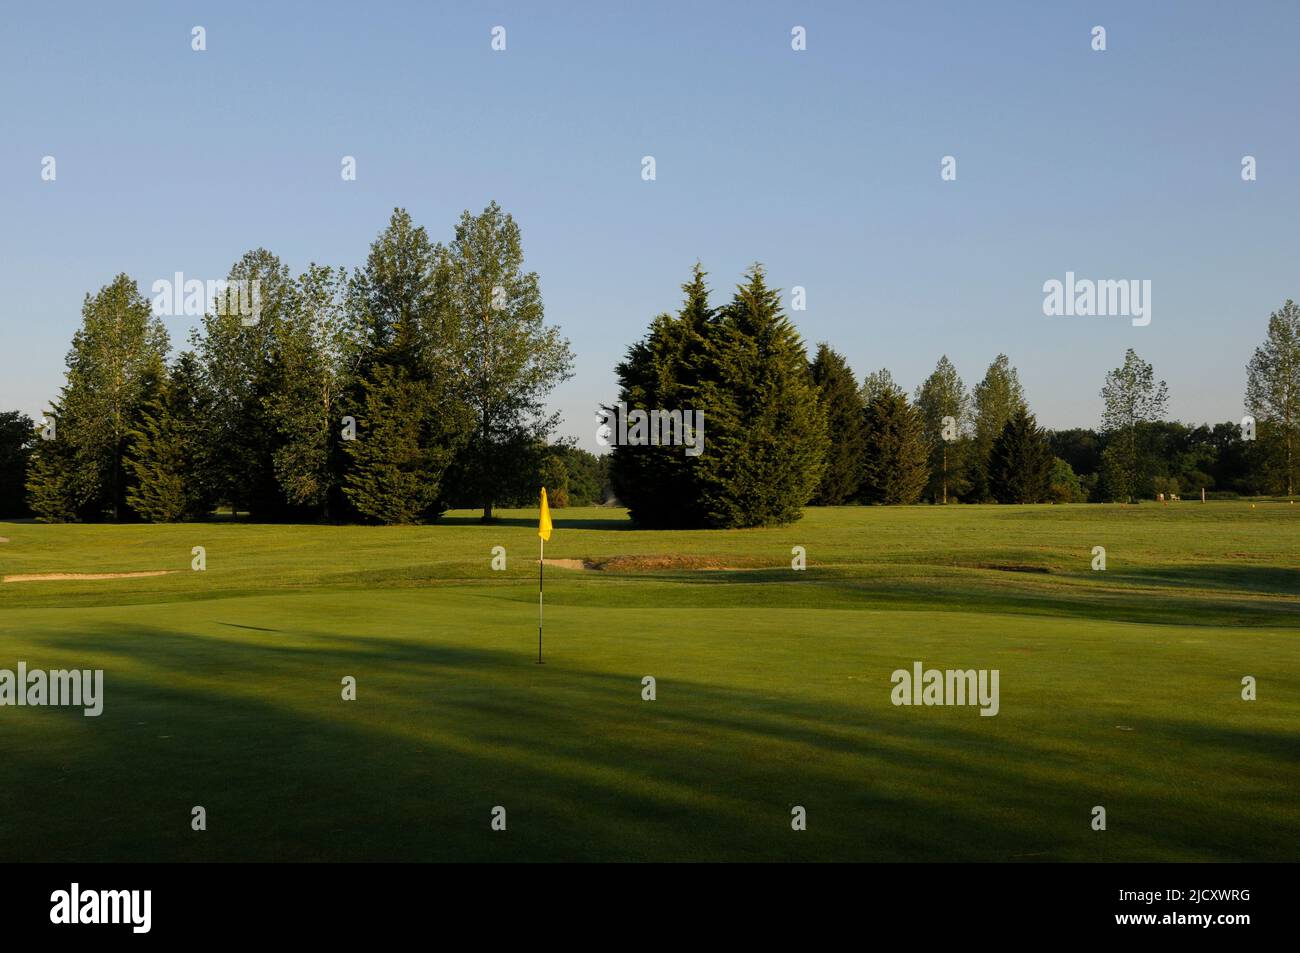 View of the 1st Green with yellow flag, Horne Park Golf Club, Horne, South Godstone, Surrey, England Stock Photo